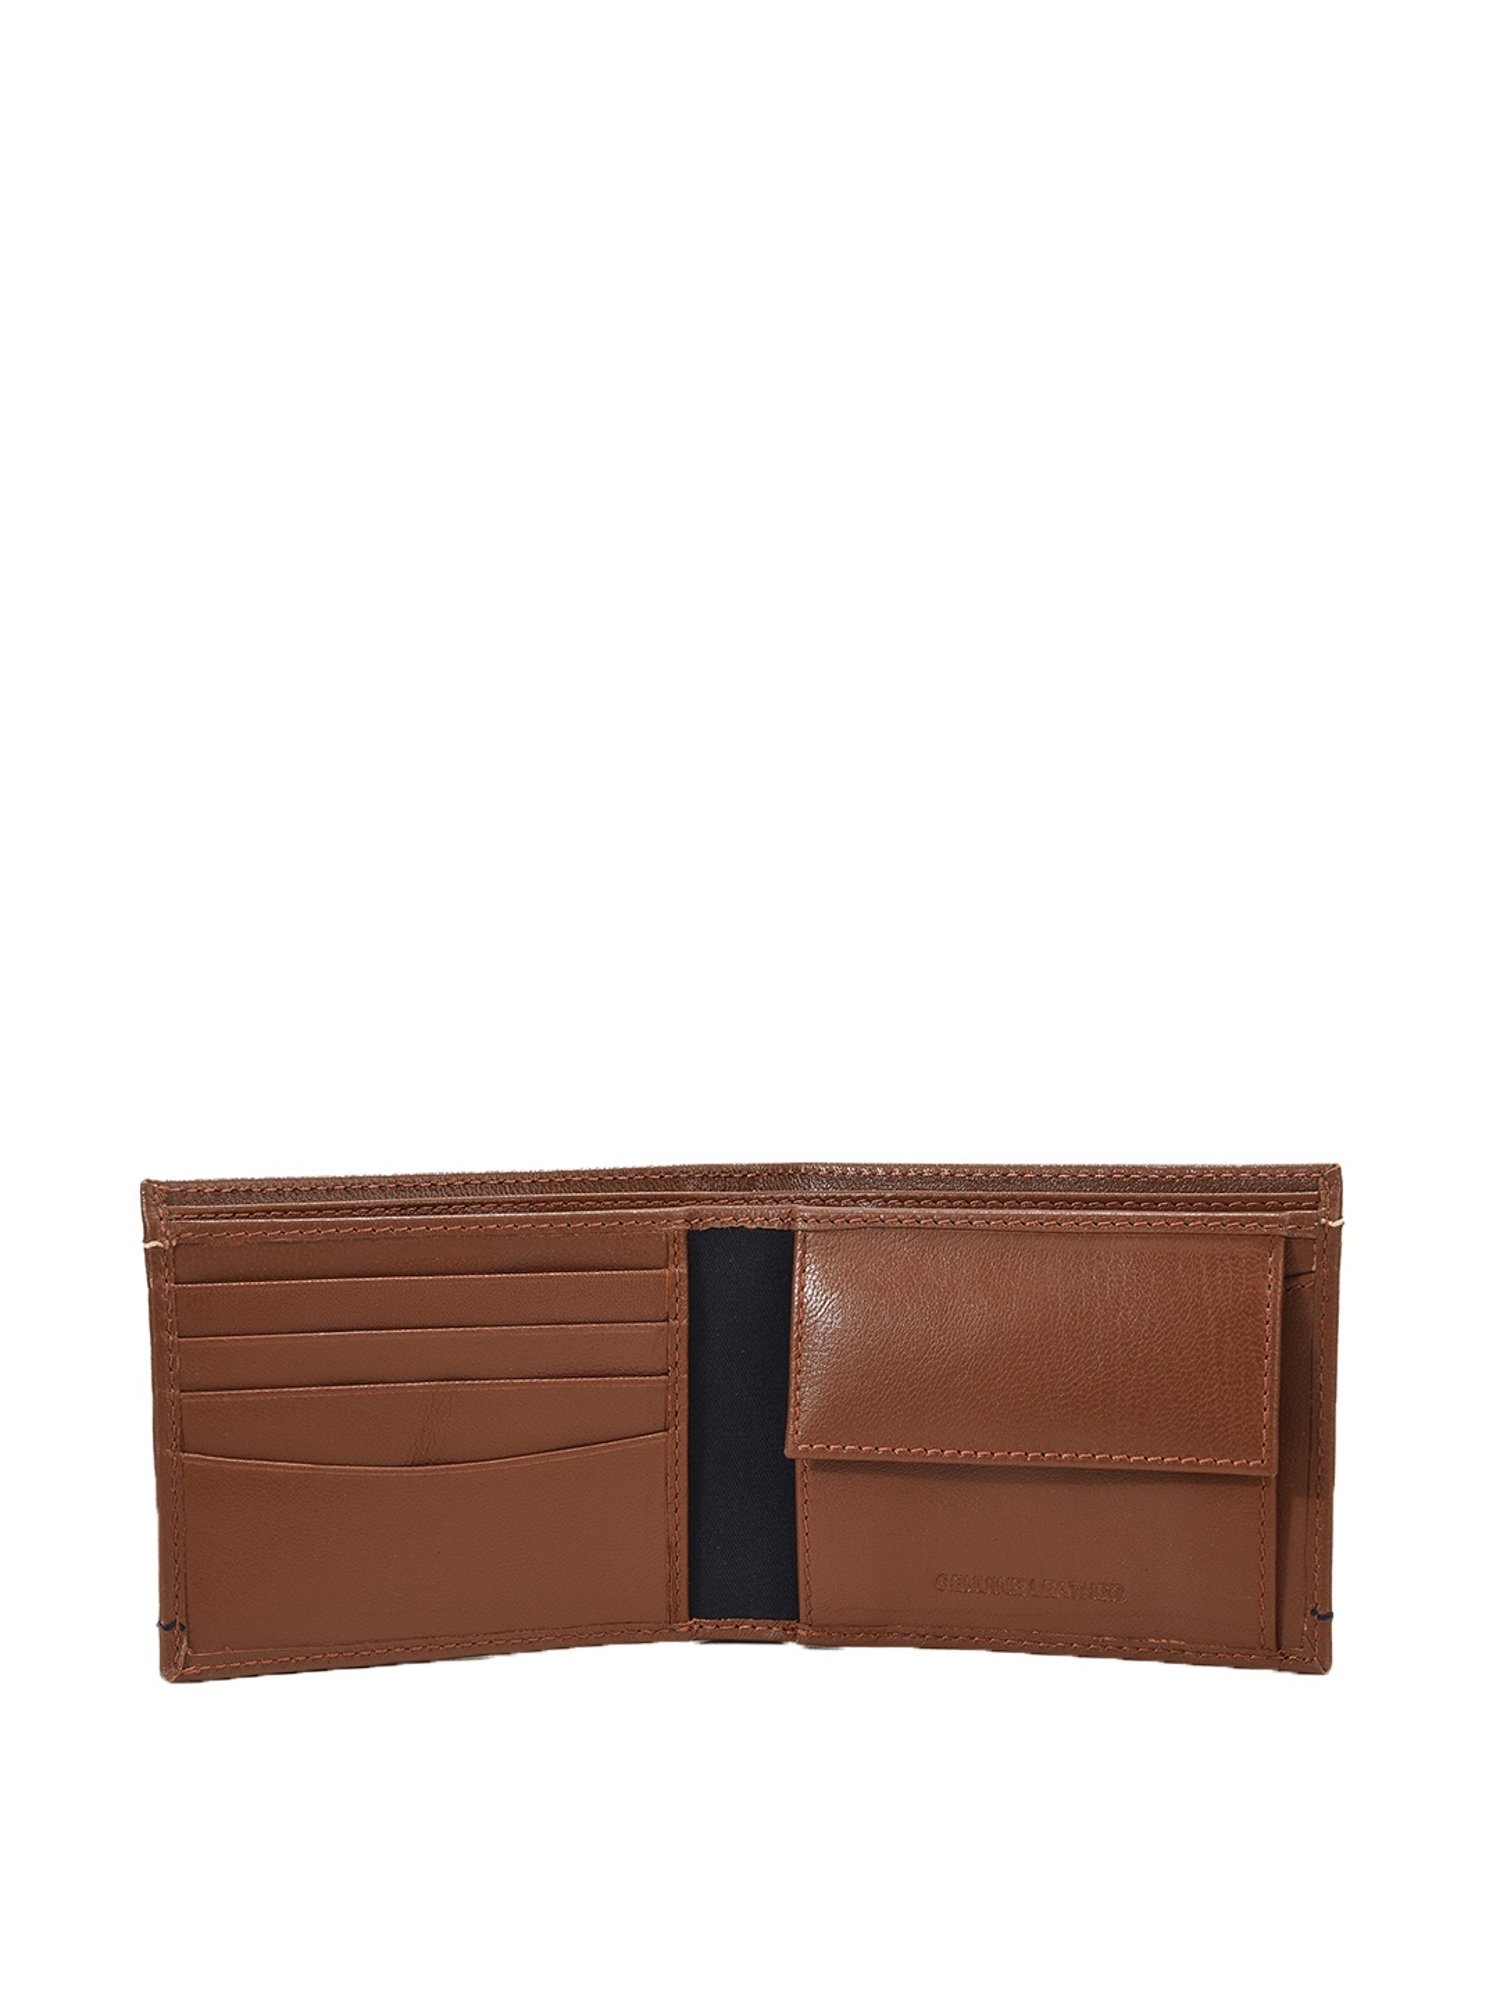 Woodland Wallet For Mens in Panipat - Dealers, Manufacturers & Suppliers  -Justdial